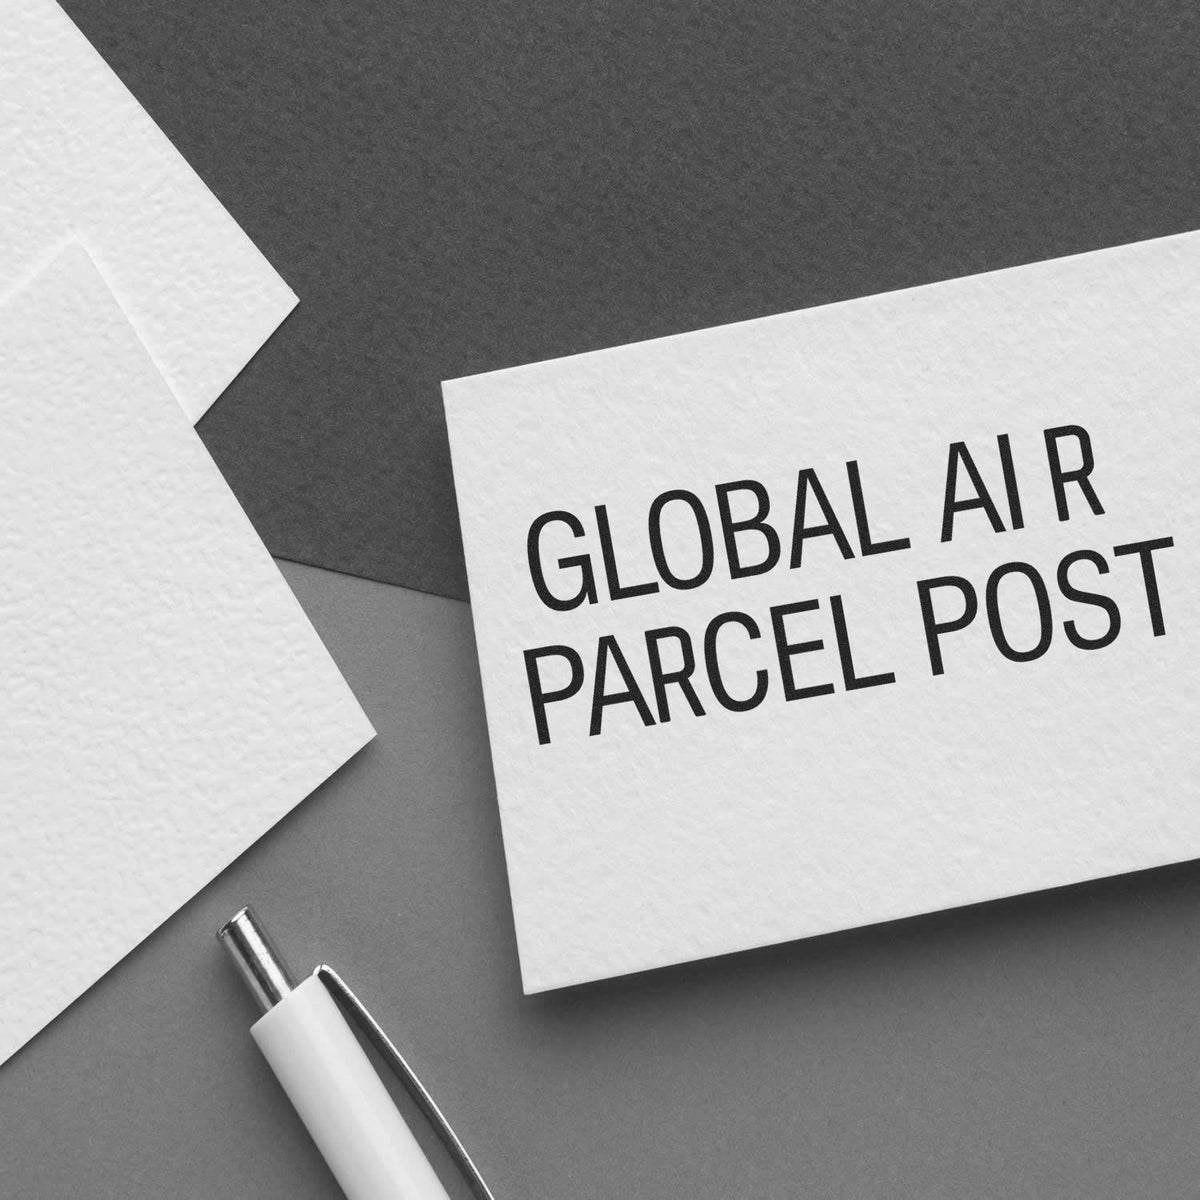 Global Air Parcel Post Rubber Stamp Lifestyle Photo